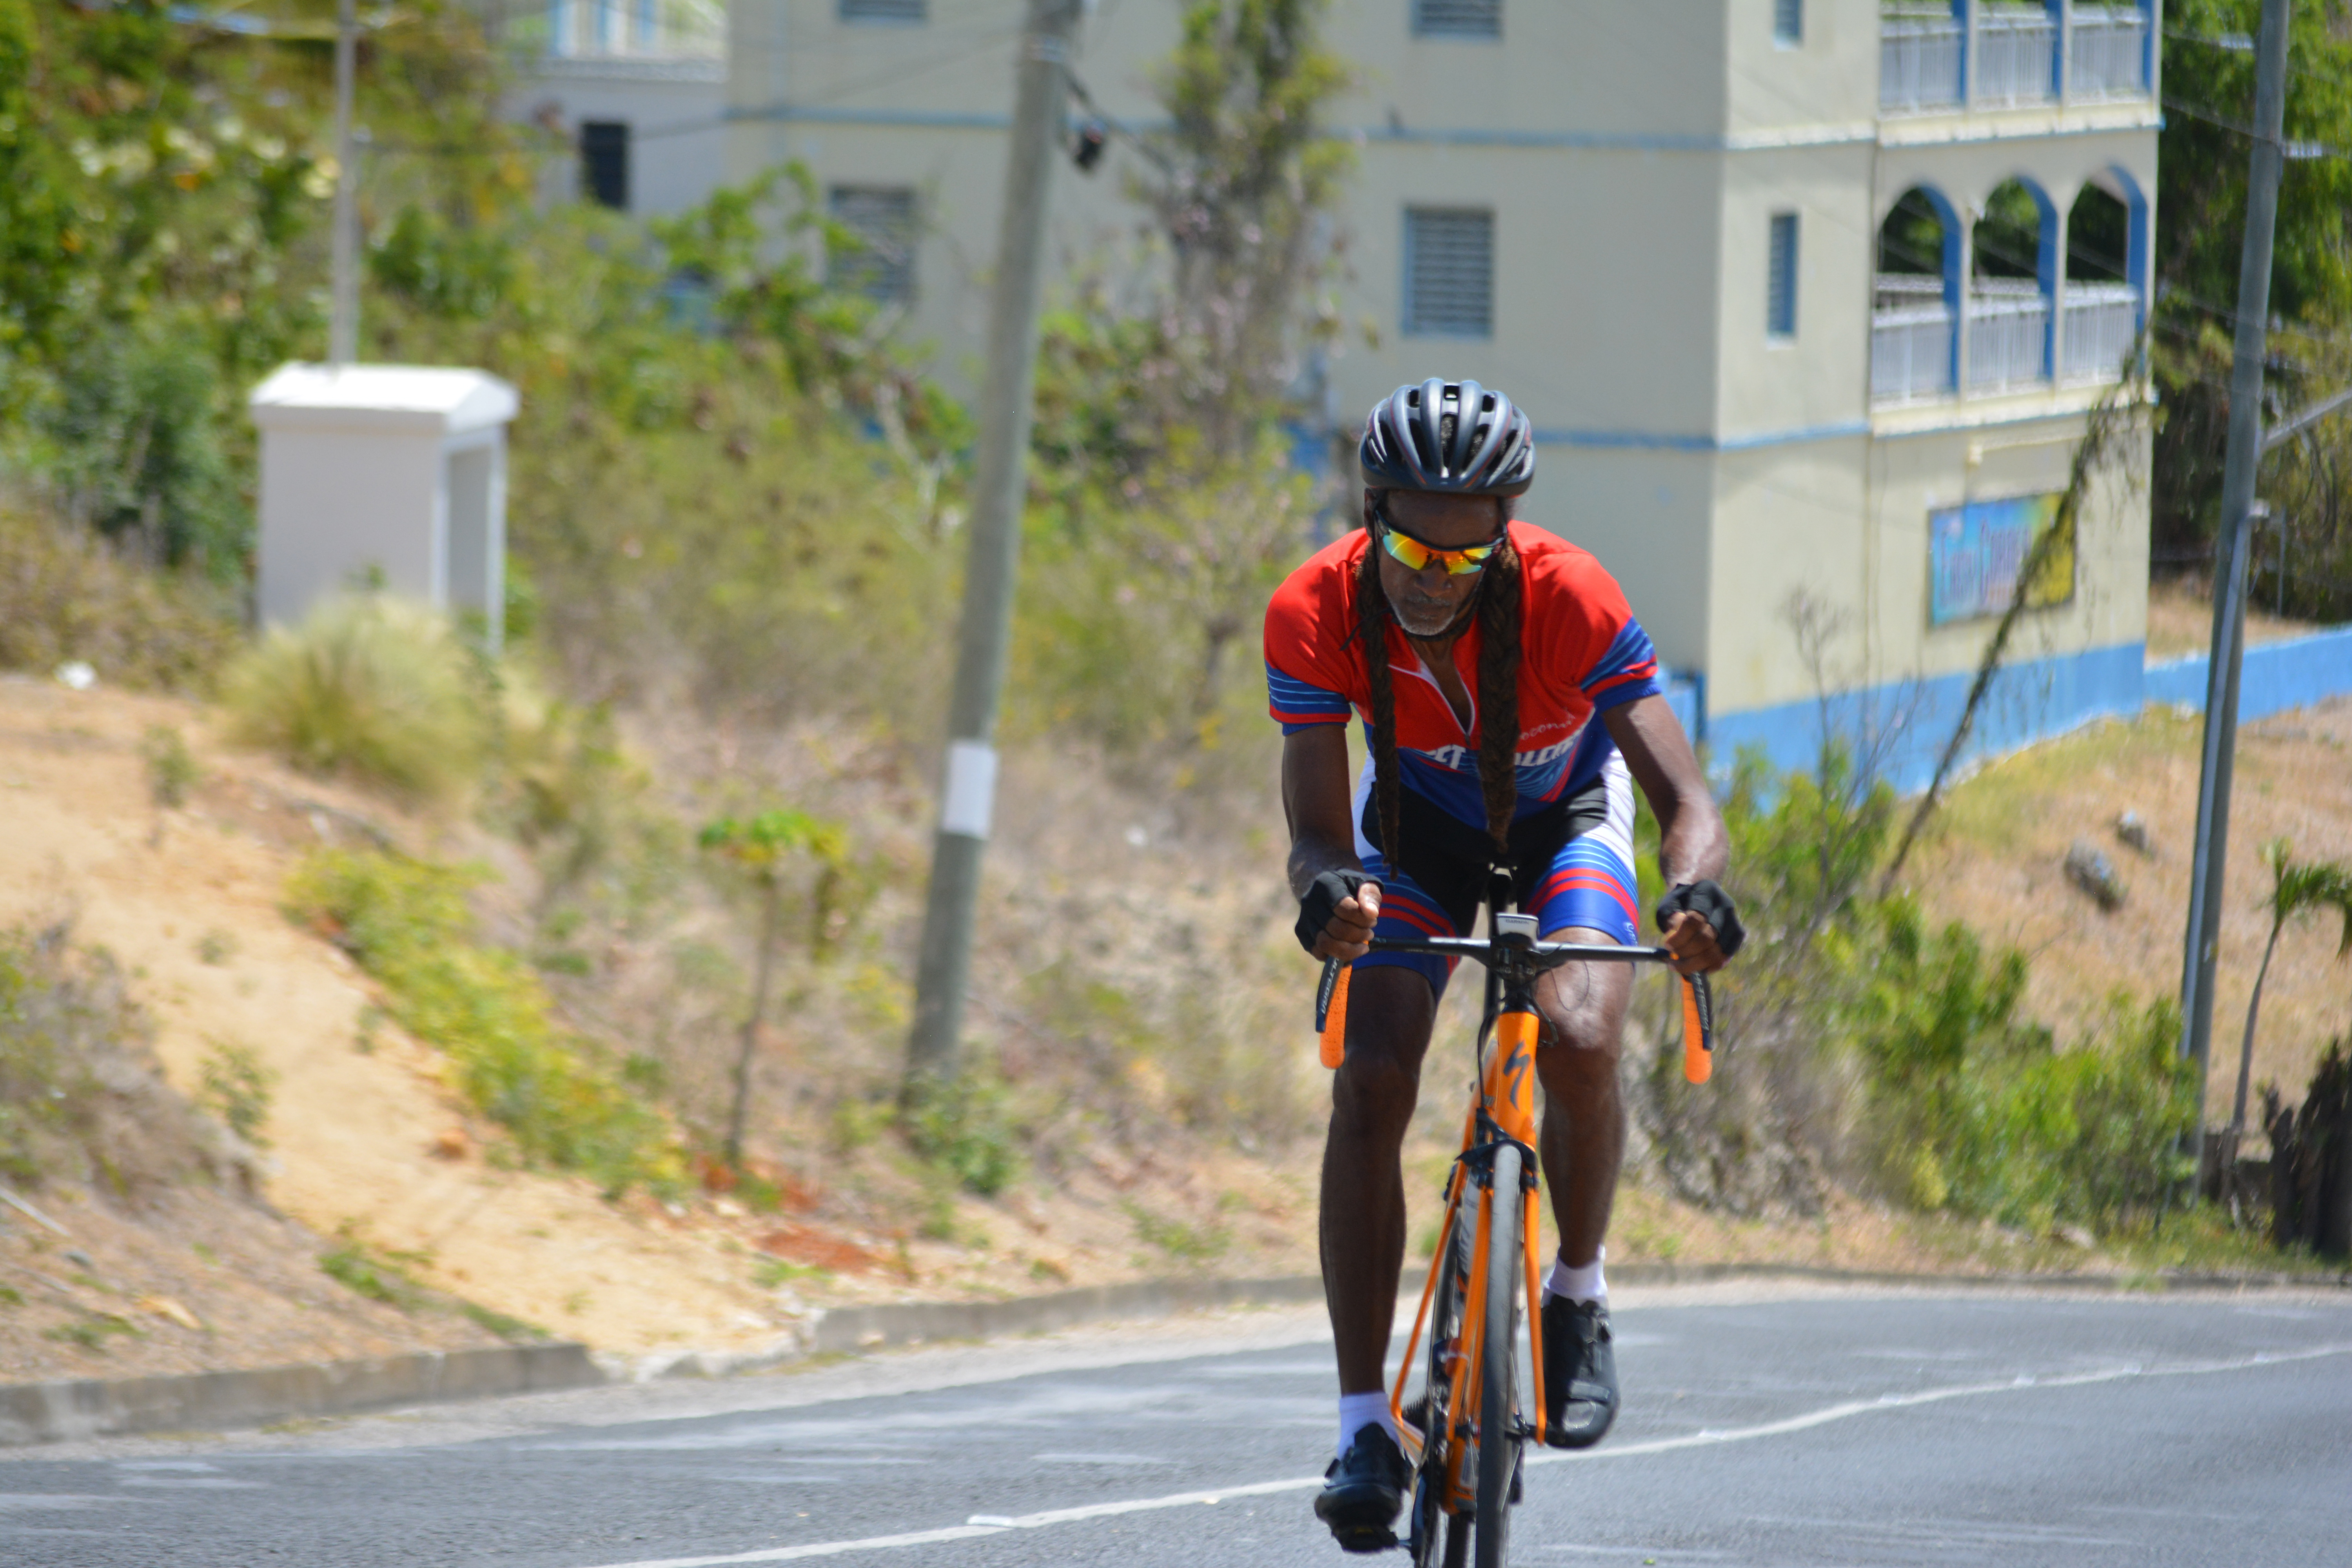 Levi Baron, a member of the Dominica Cycling Association participates in the 20th John T. Memorial Cycling Race in the masters category, Anguilla, July 21, 2019. Baron finished ninth in the event.